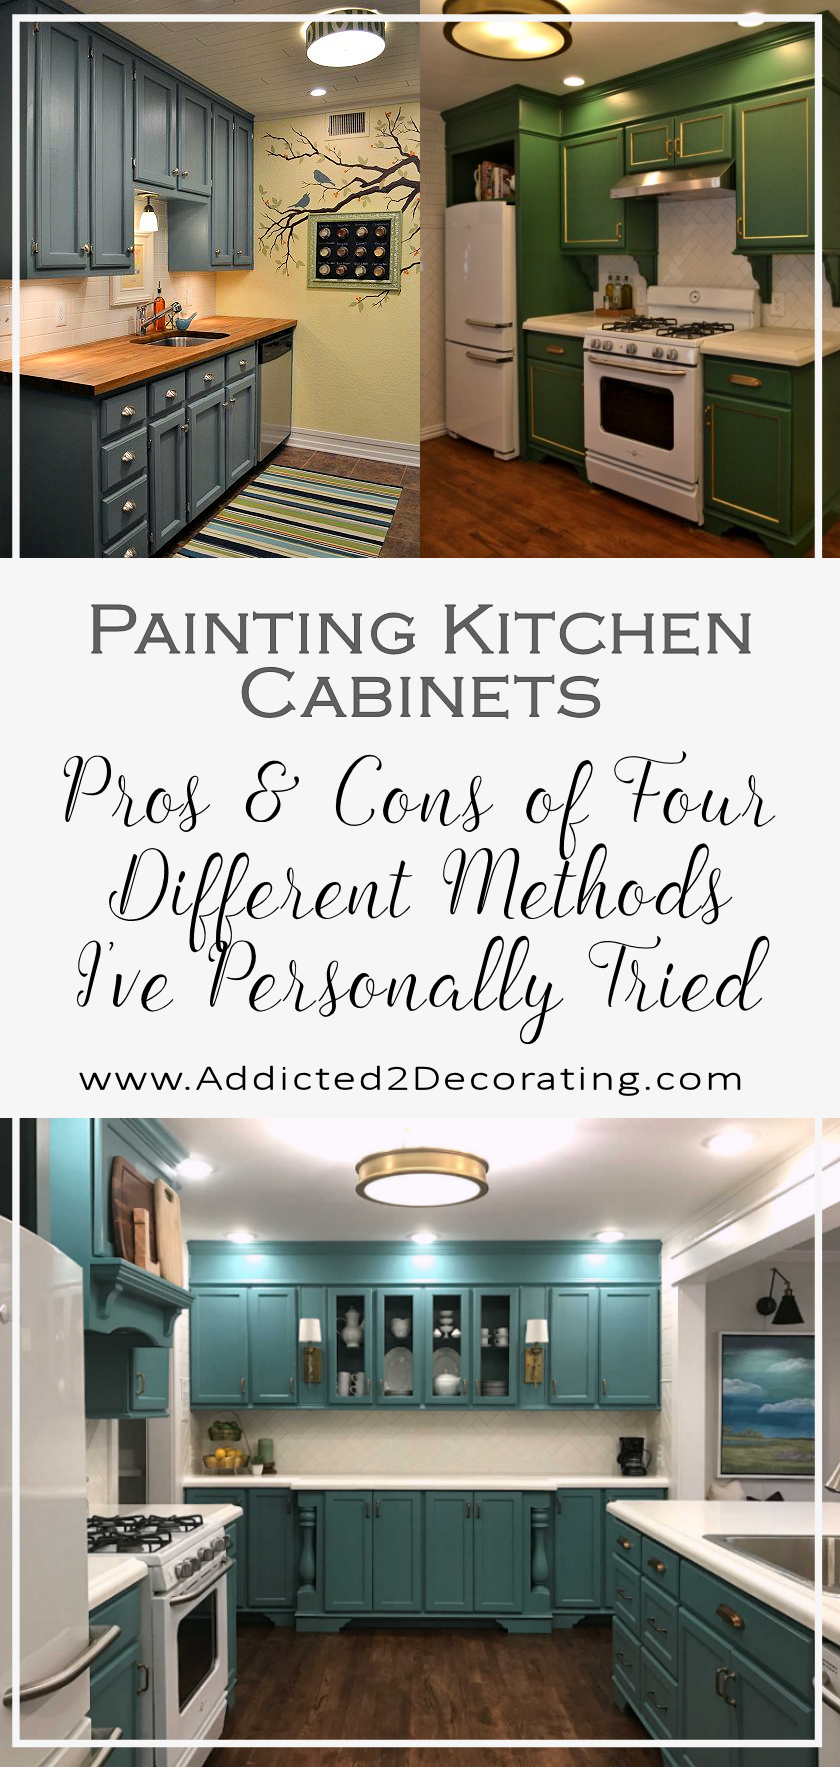 Painting Kitchen (And Bathroom) Cabinets – Pros & Cons Of Four Different Methods I’ve Personally Used